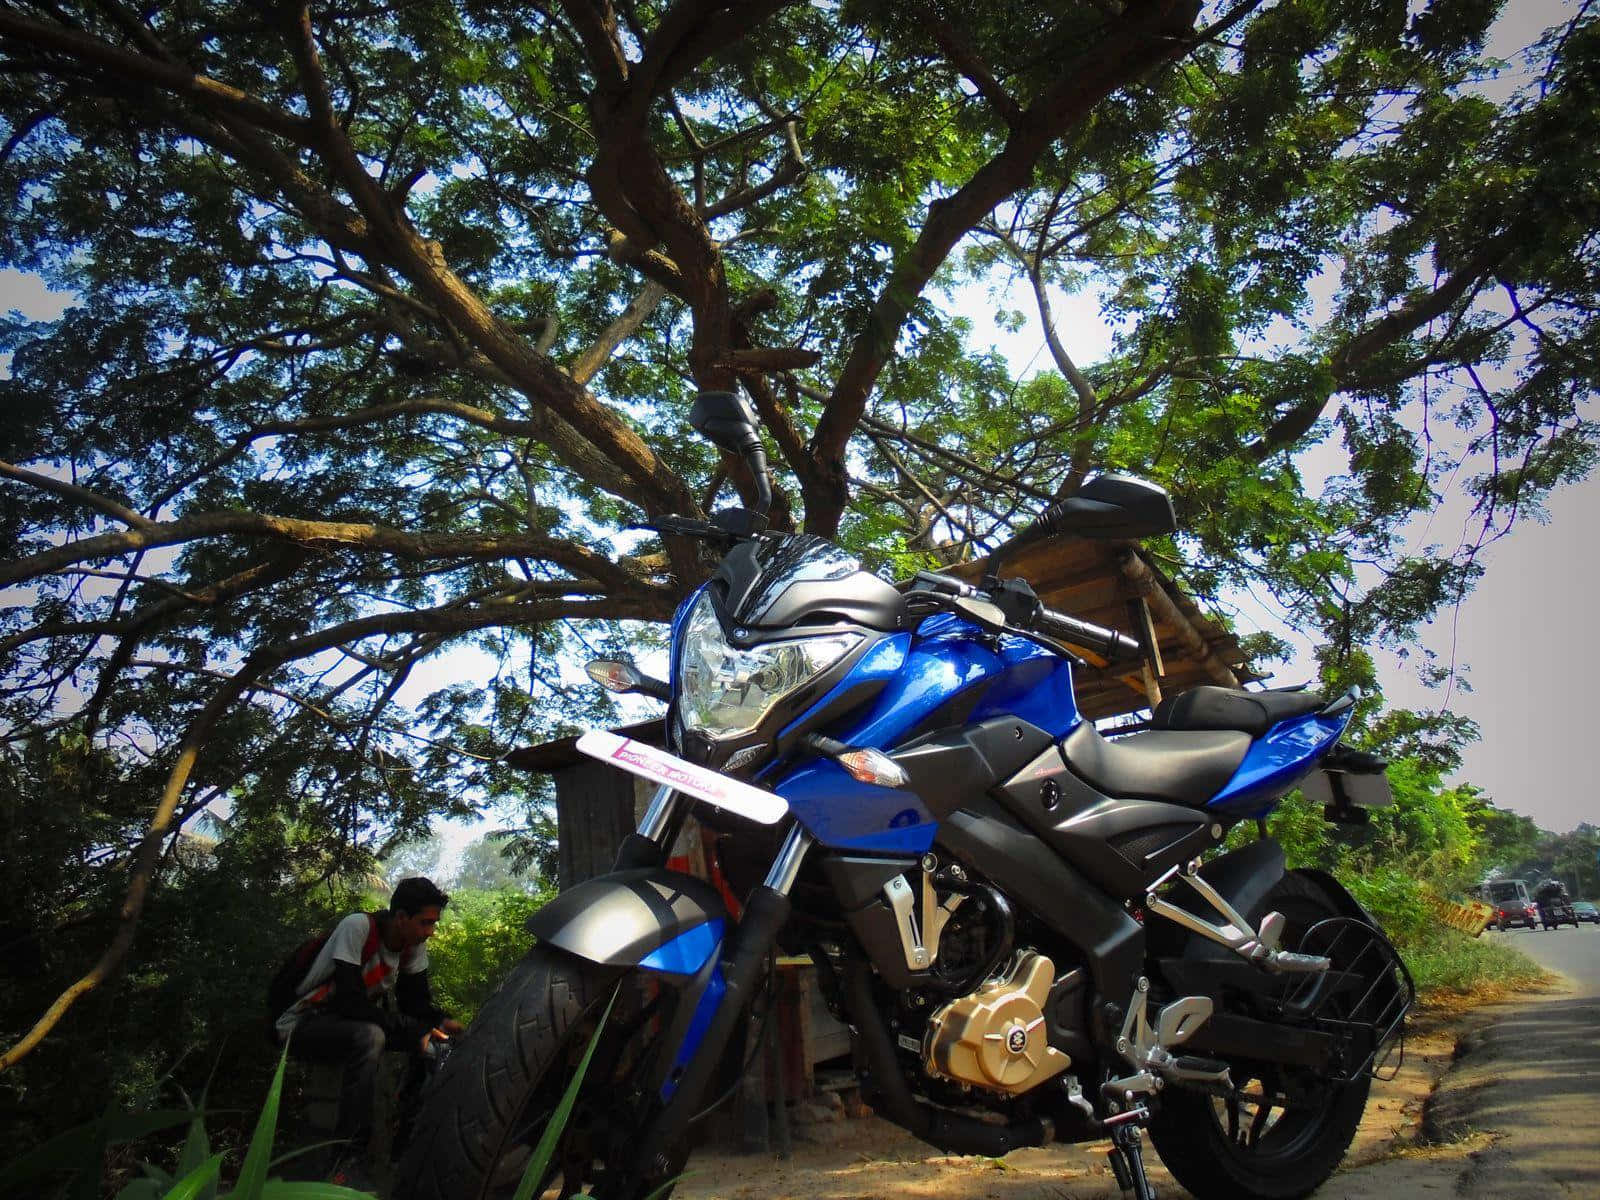 A Blue Motorcycle Parked On A Road Next To A Tree